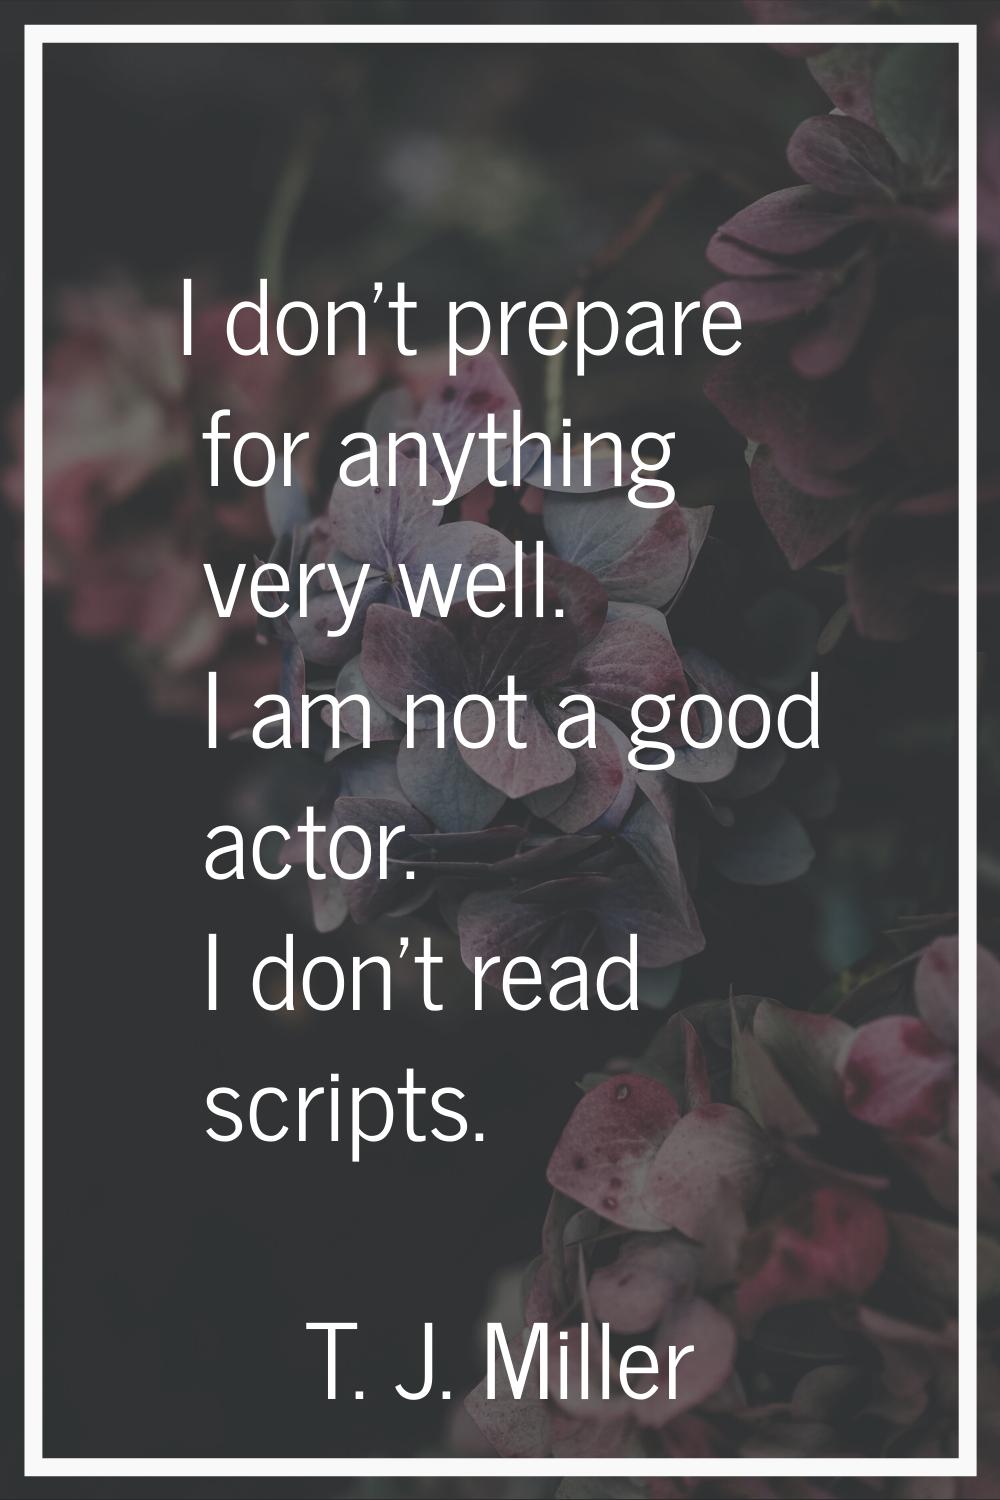 I don't prepare for anything very well. I am not a good actor. I don't read scripts.